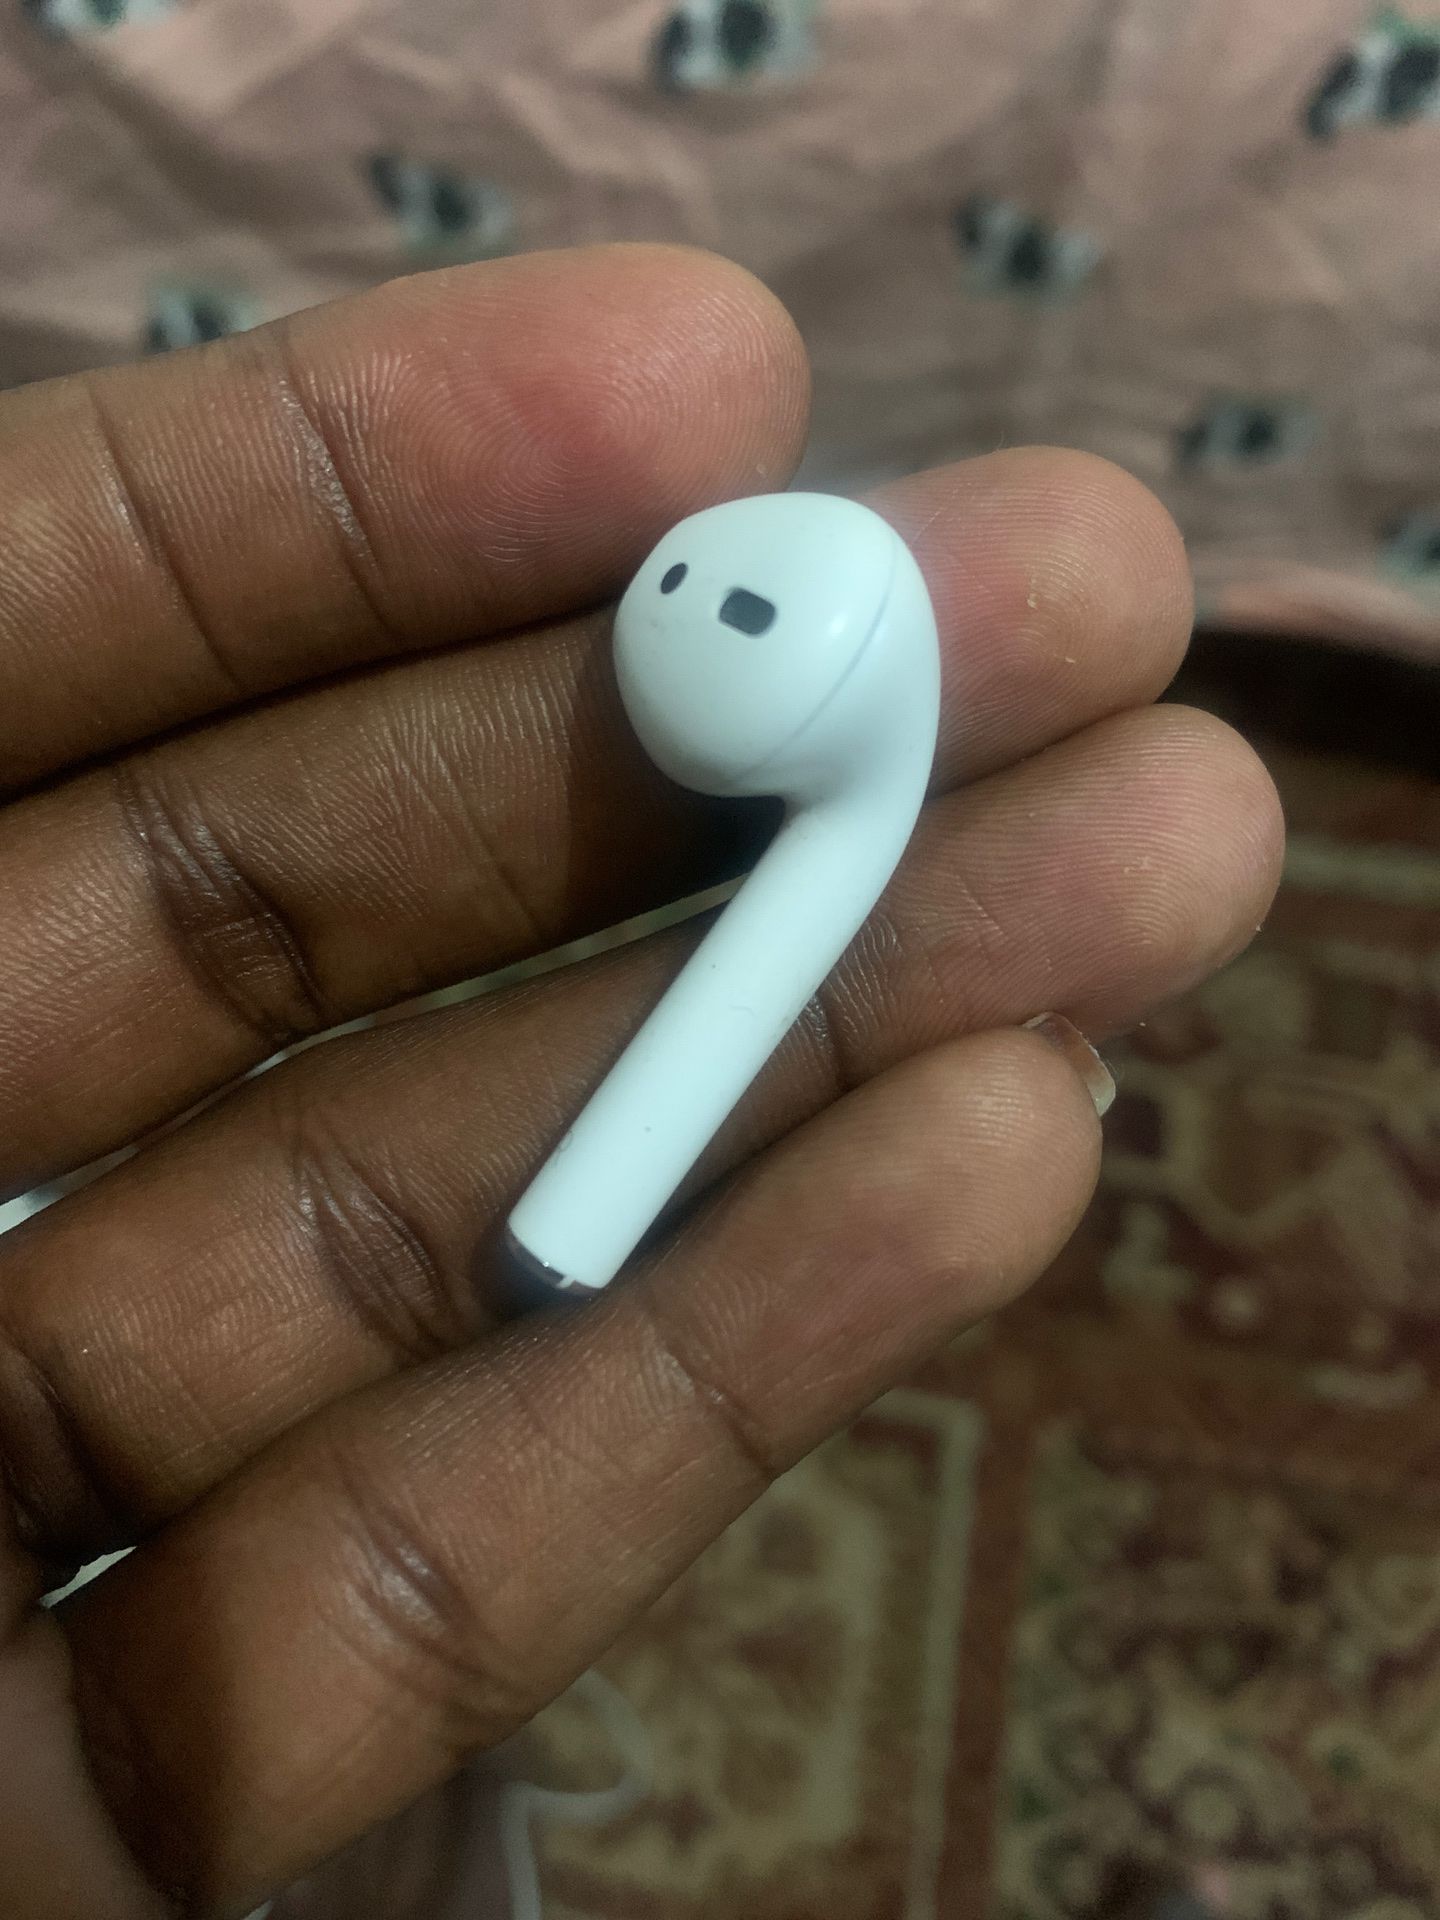 AirPod right side